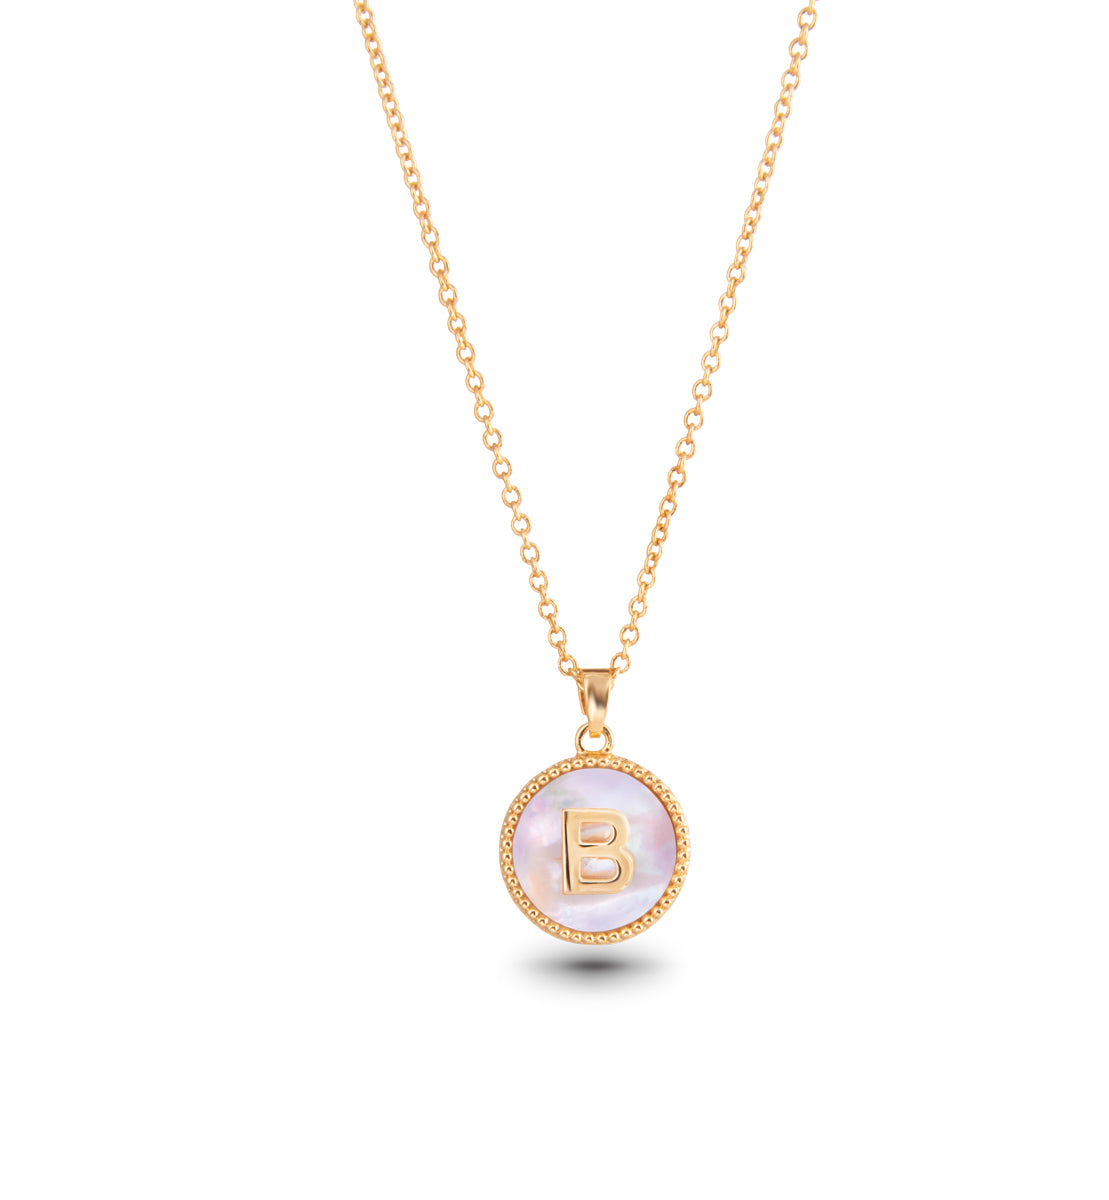 Gold Mother of Pearl Initial Necklace - B